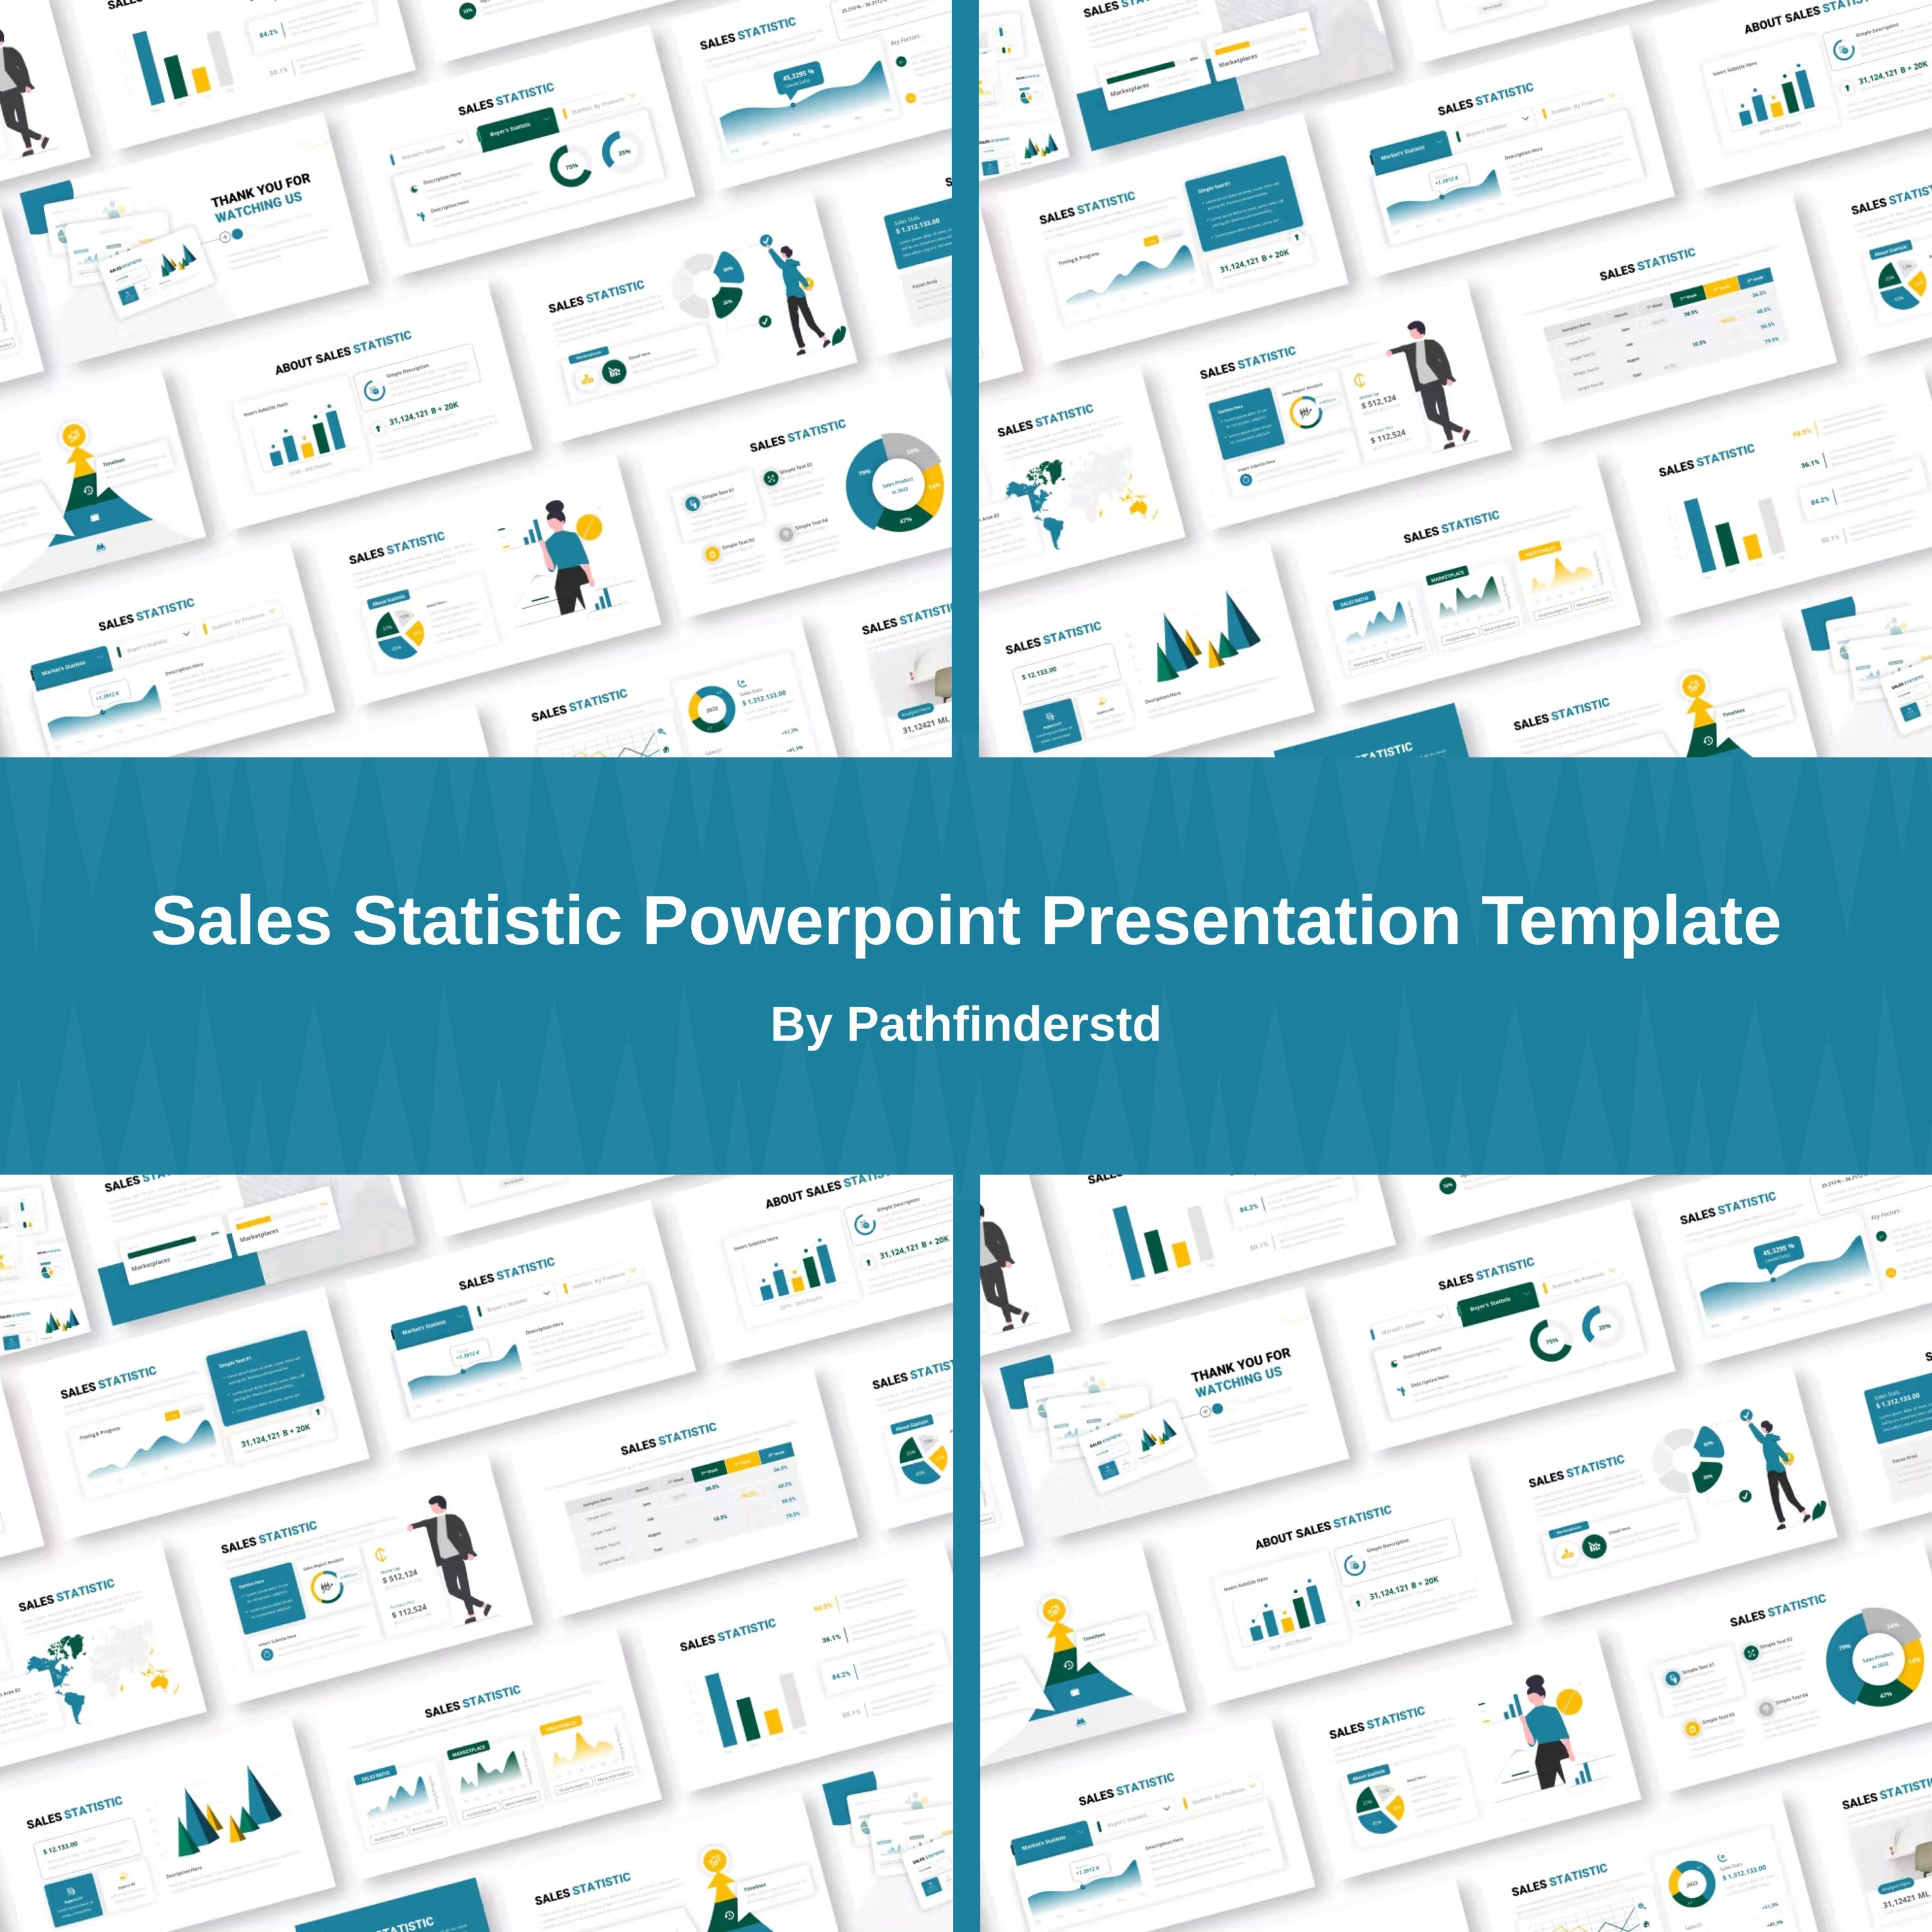 Sales Statistic Powerpoint Presentation Template - main image preview.